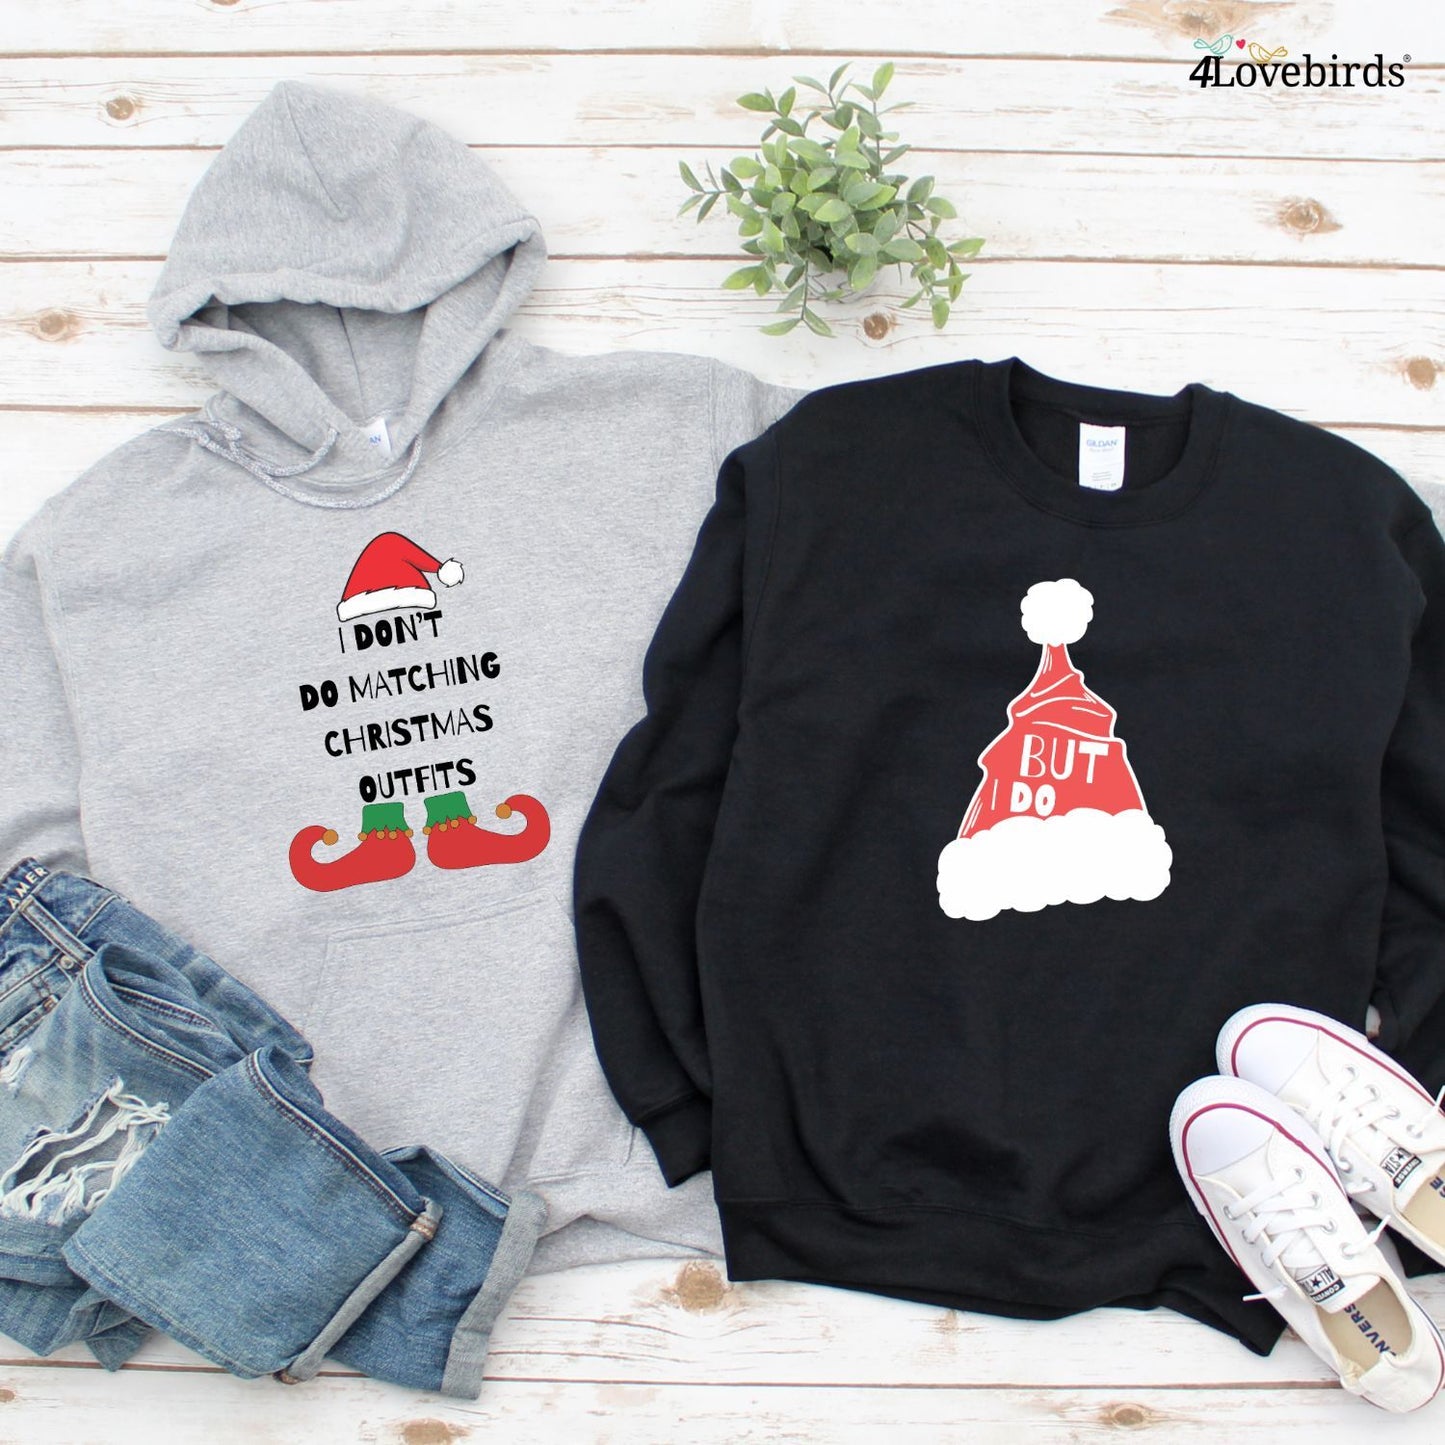 Festive His & Hers Matching Outfits with Santa Slogan: Ideal Set for Christmas Couples